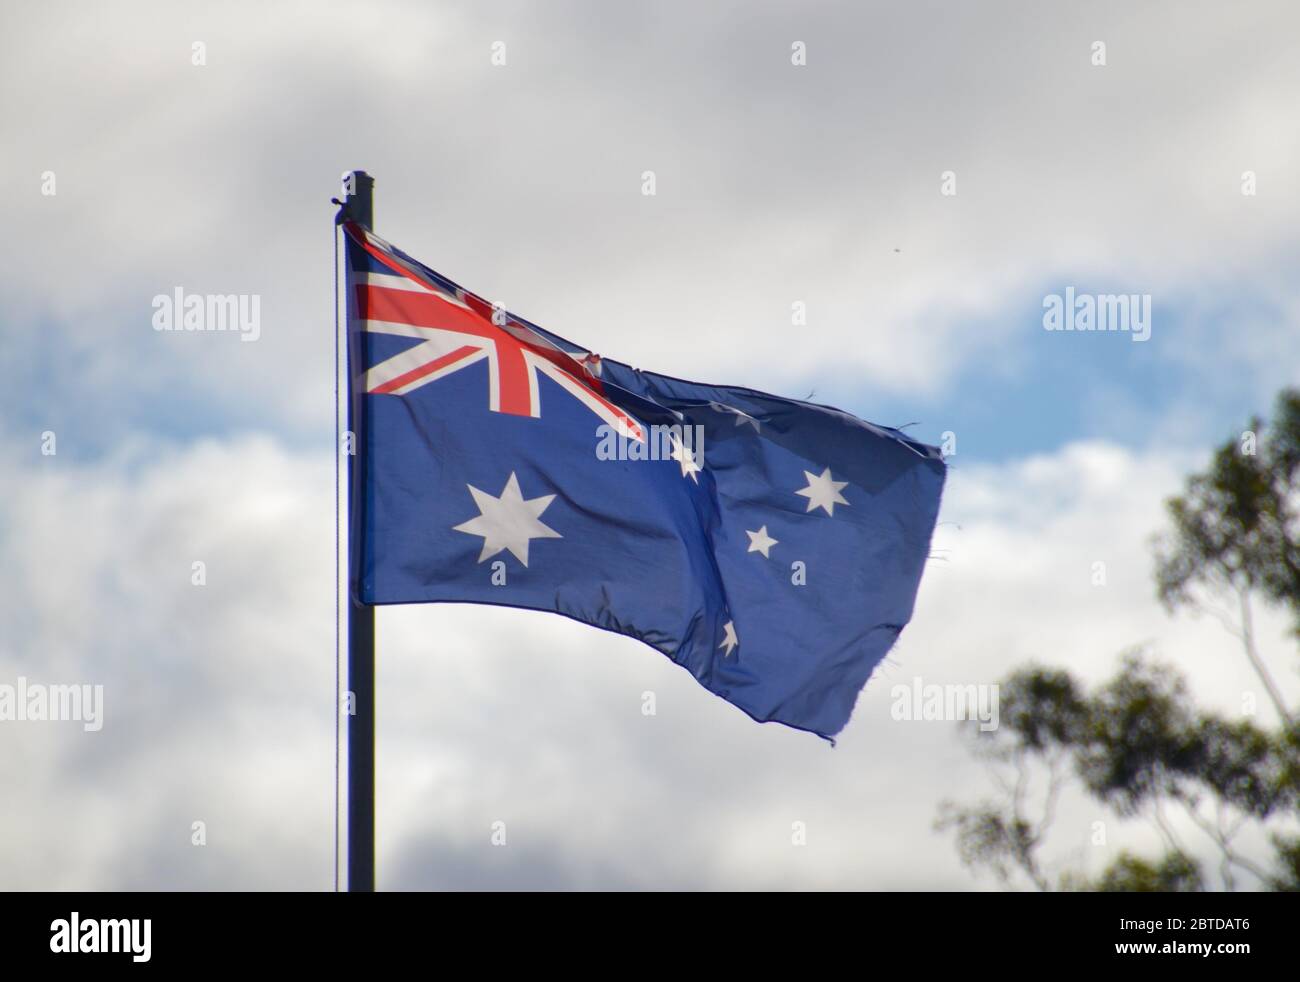 Australian national flag flying against a cloudy blue sky with a gum tree Stock Photo